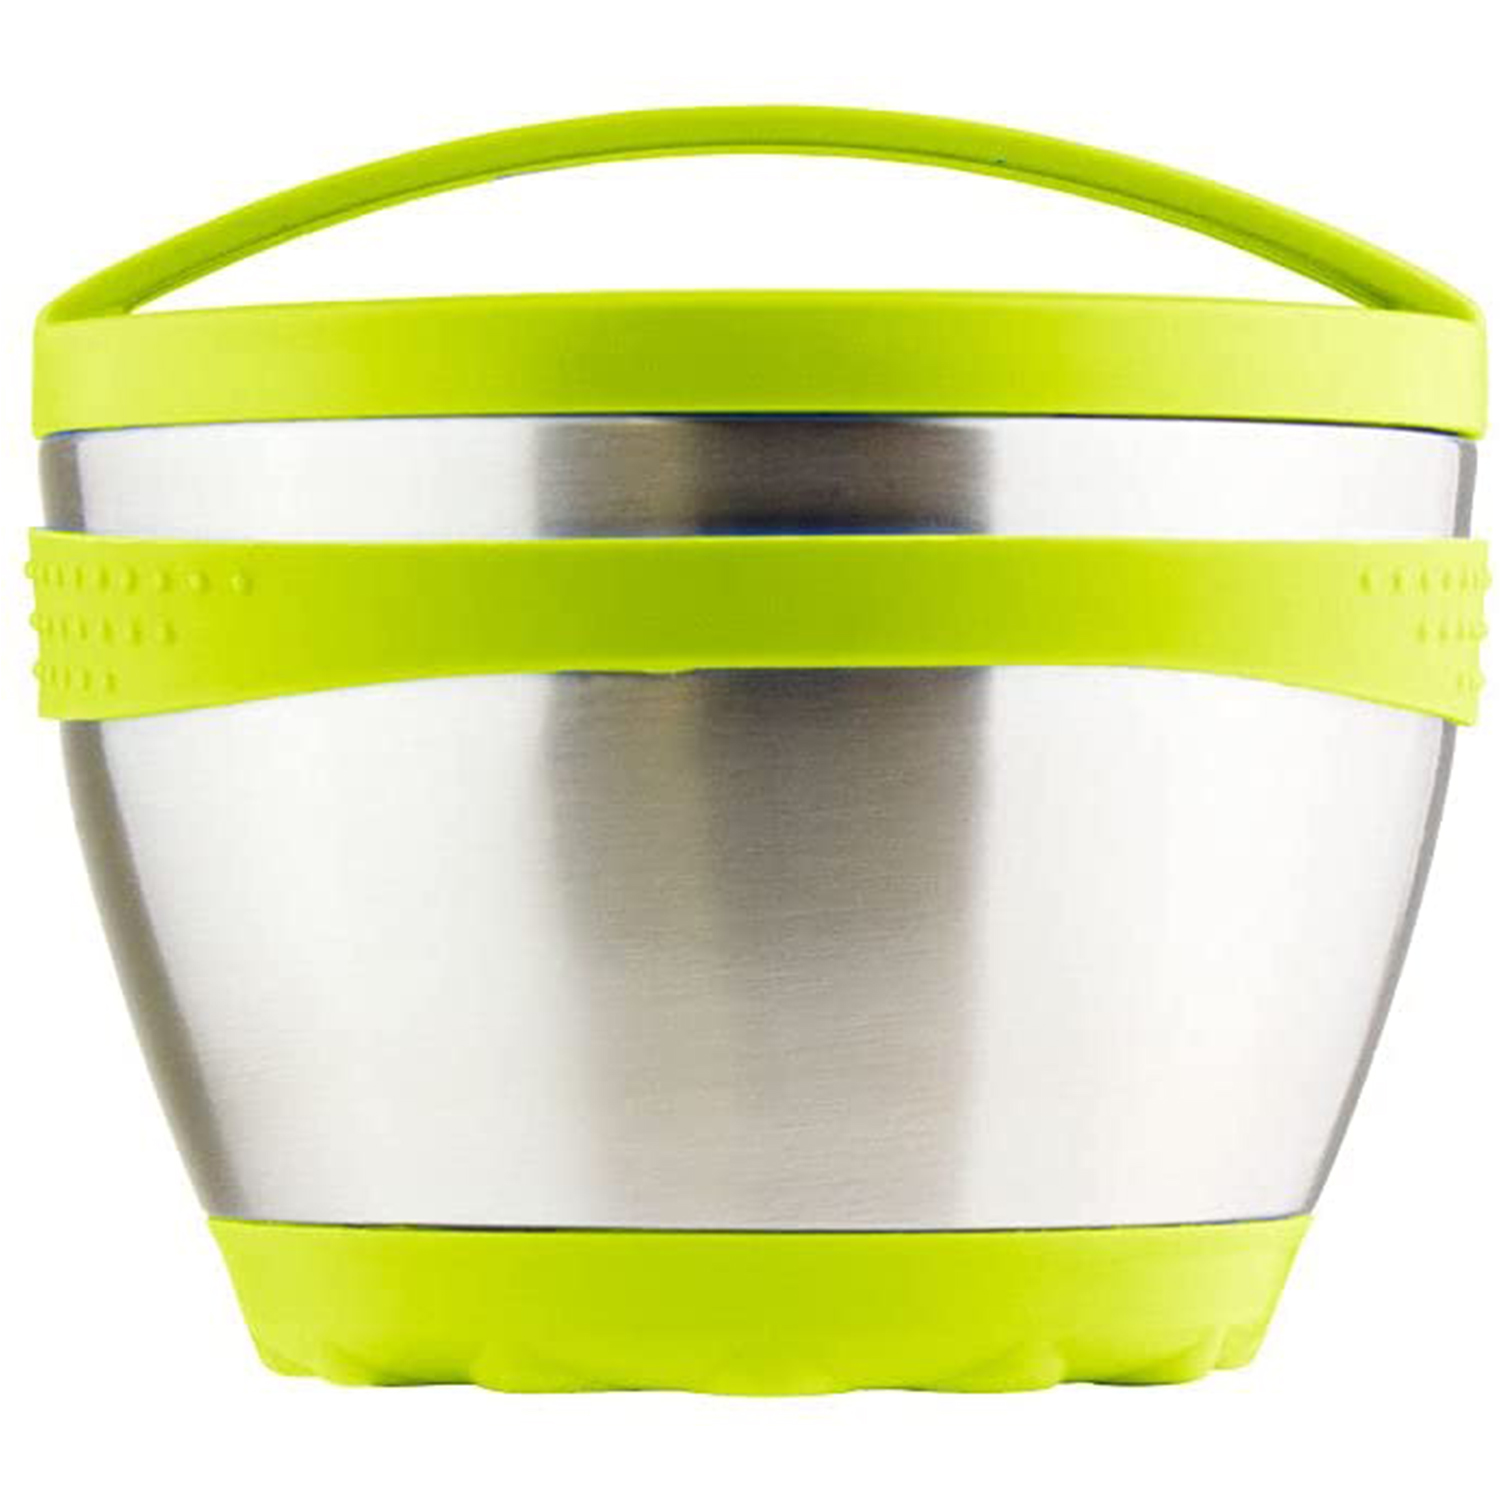 Kid Basix Safe Bowl, Reusable Stainless Steel Thermos Container